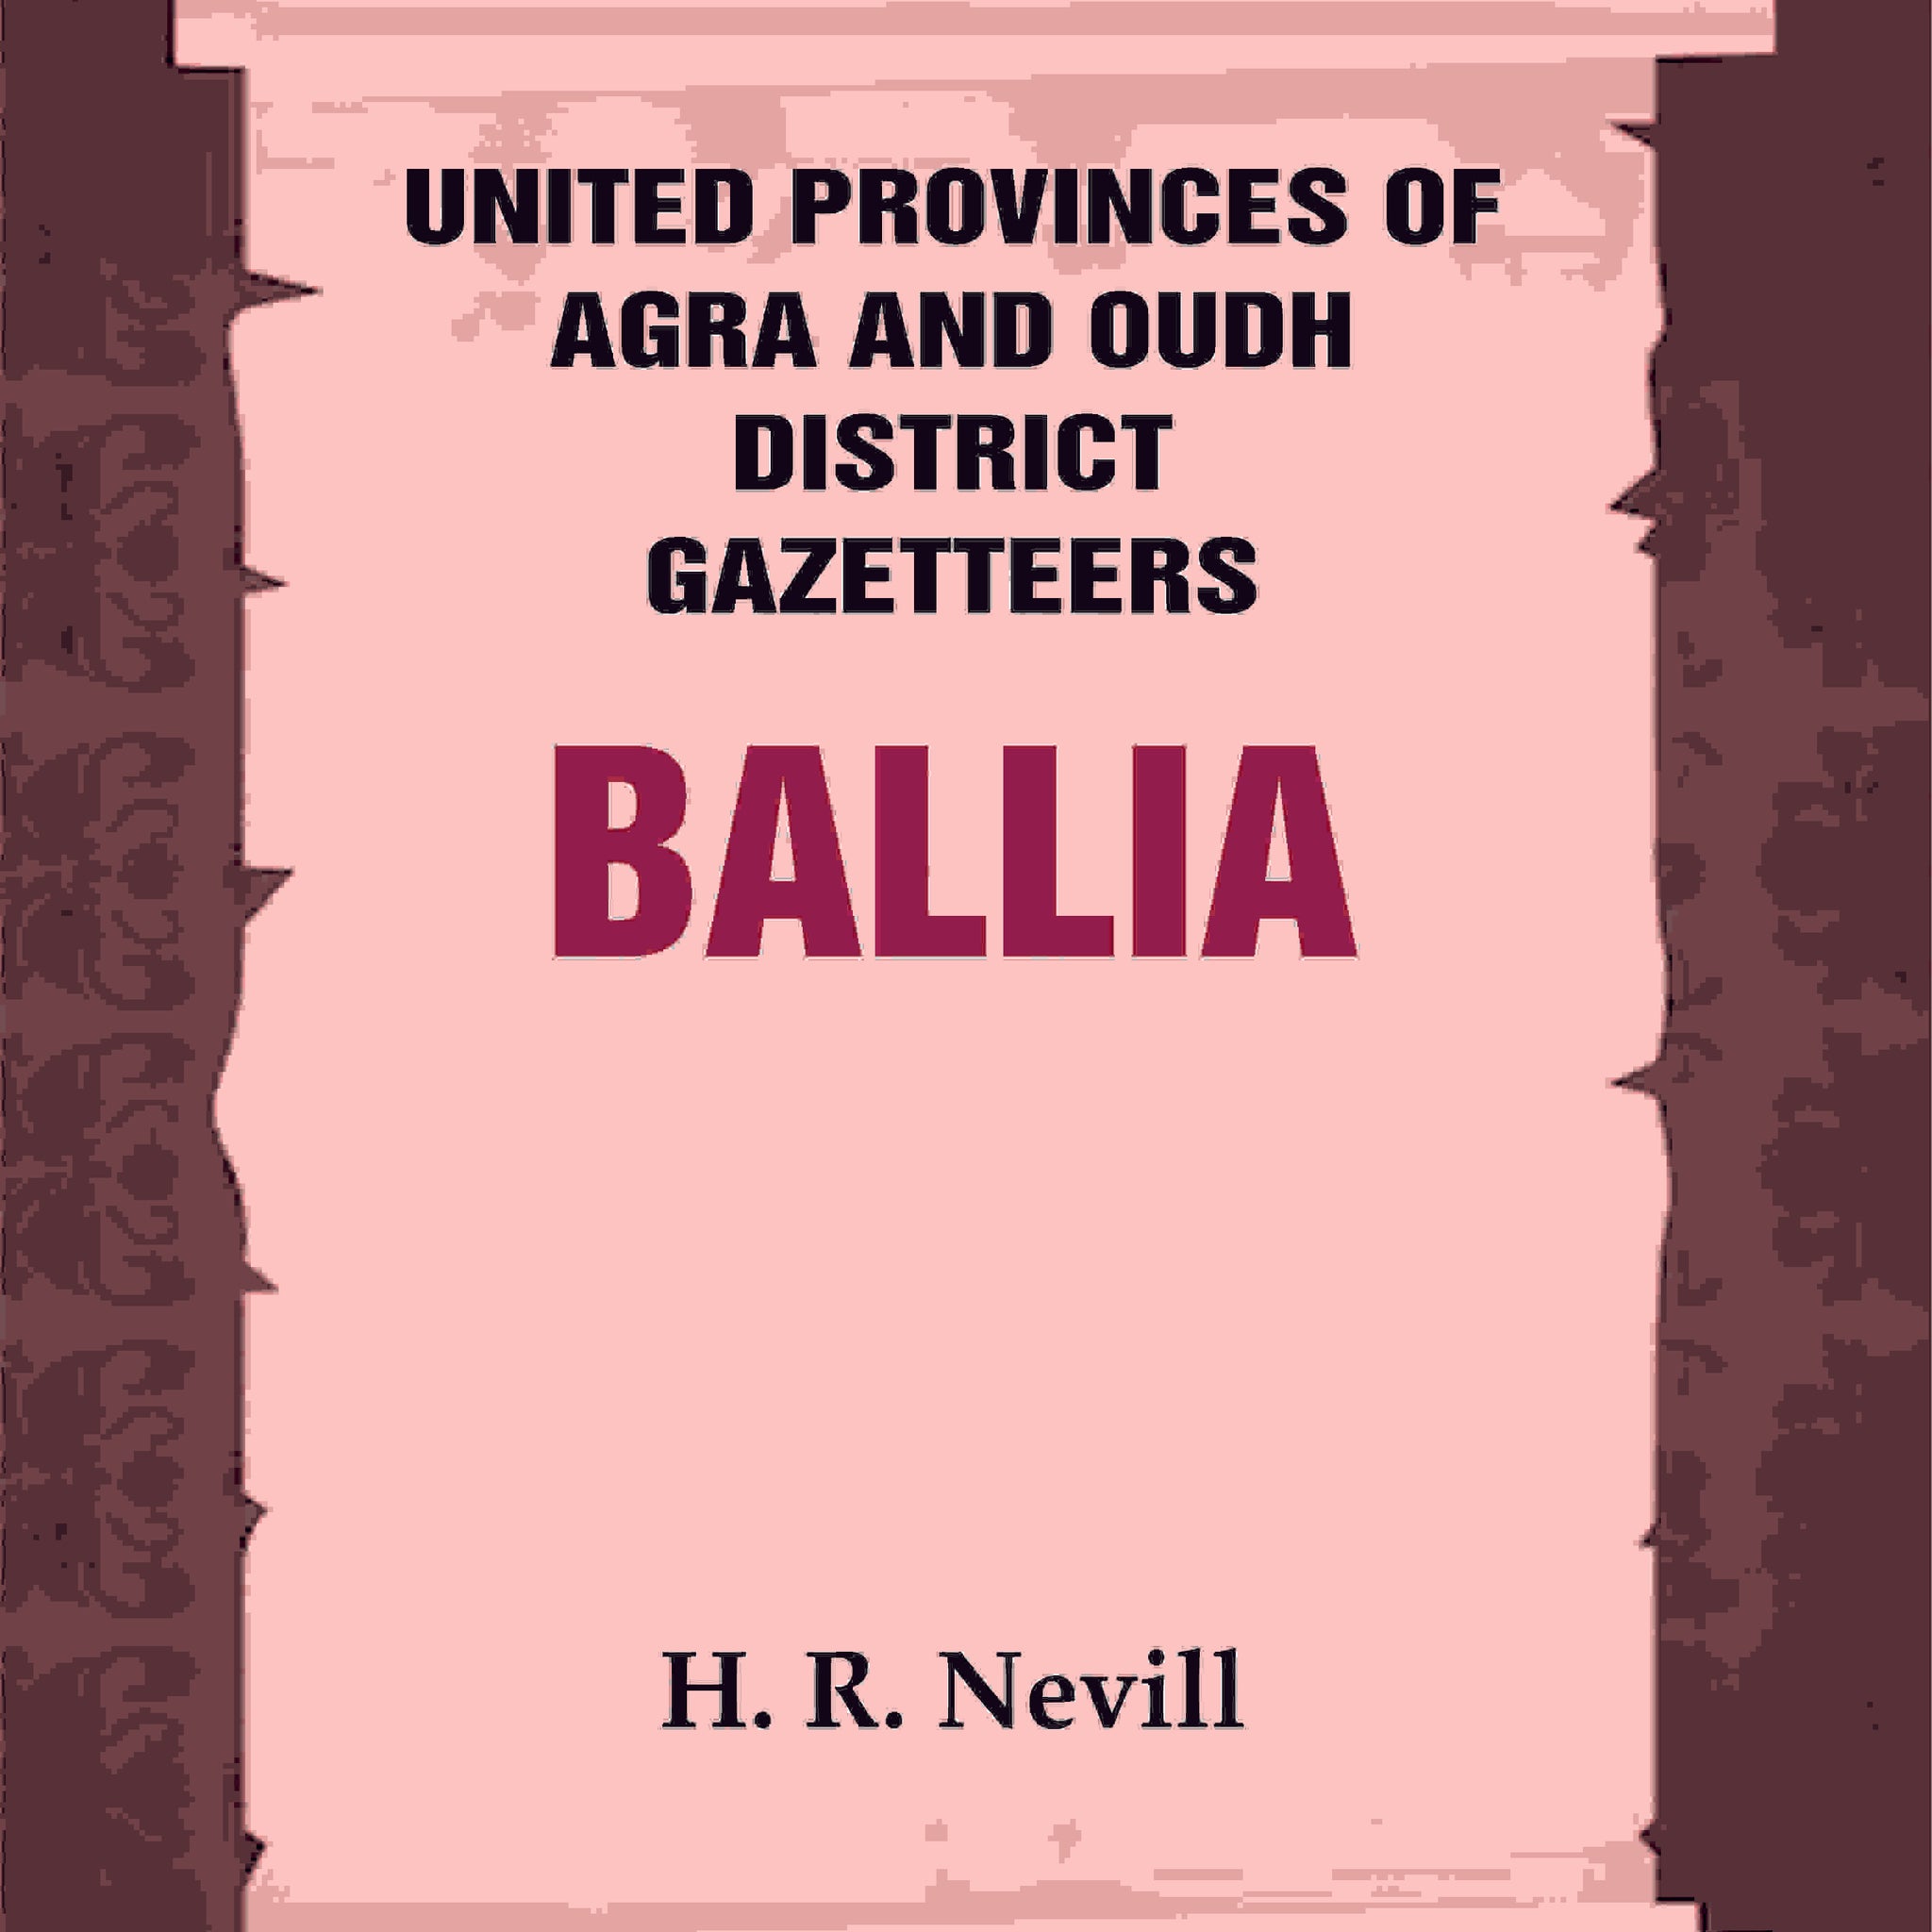 United Provinces of Agra and Oudh District Gazetteers: Ballia